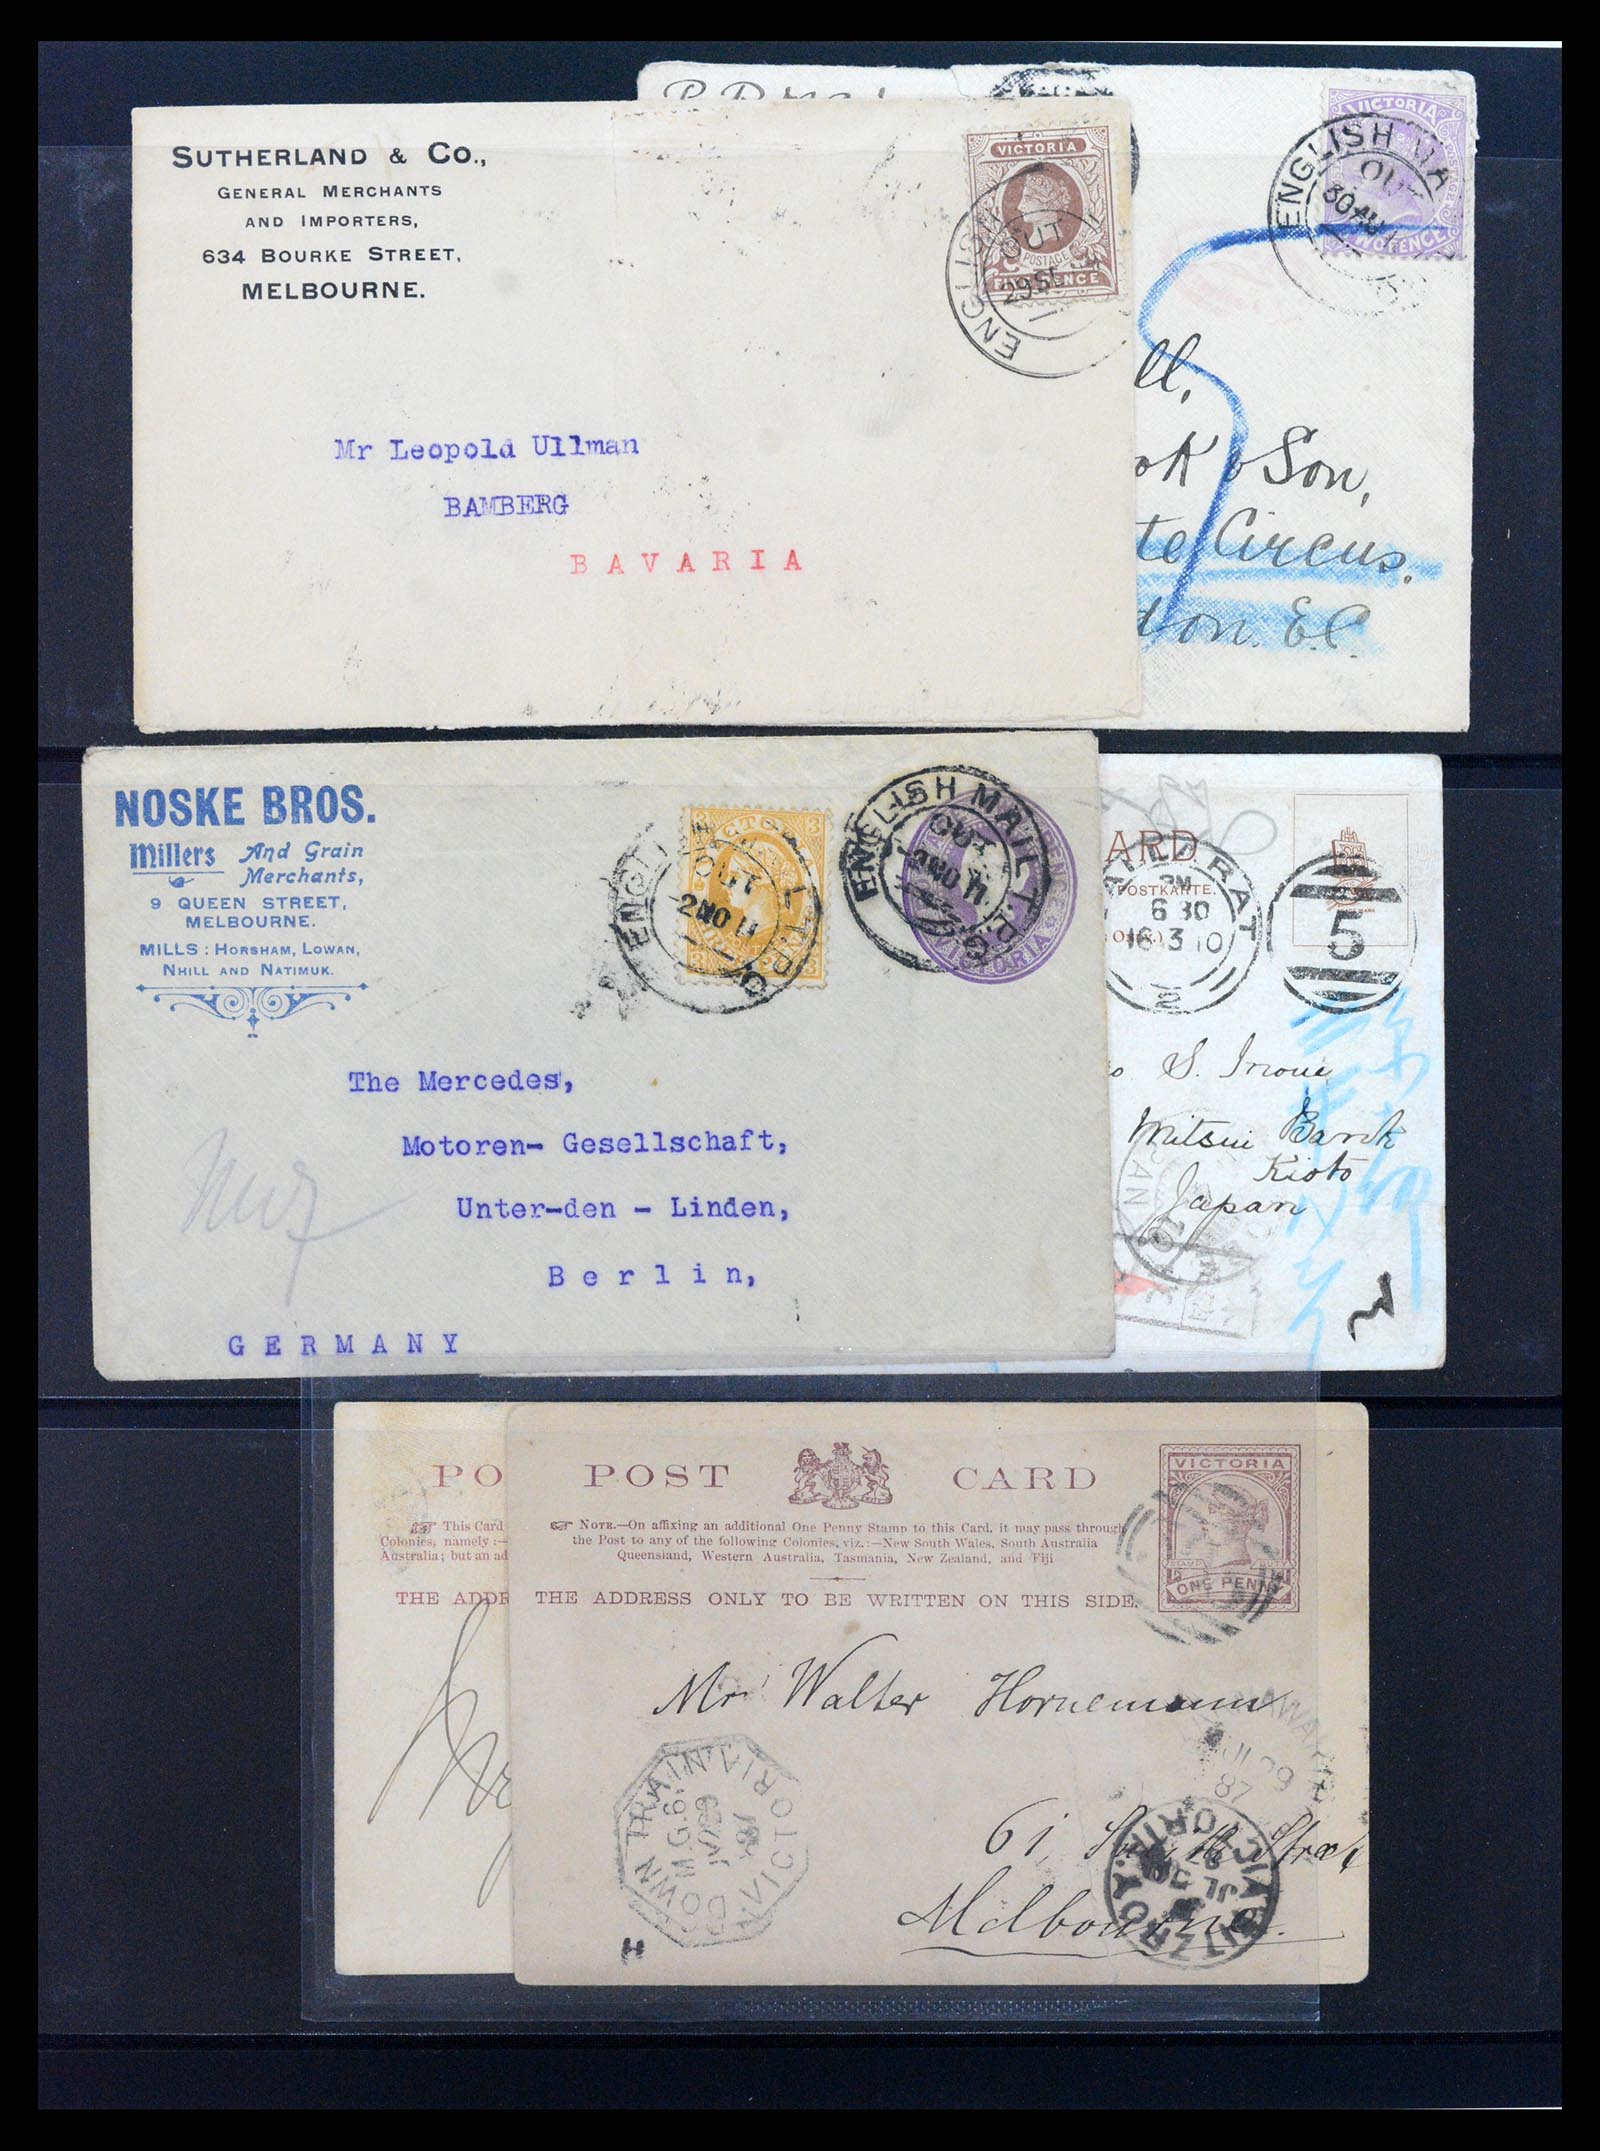 37514 037 - Stamp collection 37514 Victoria tpo cancellations 1865-1930.